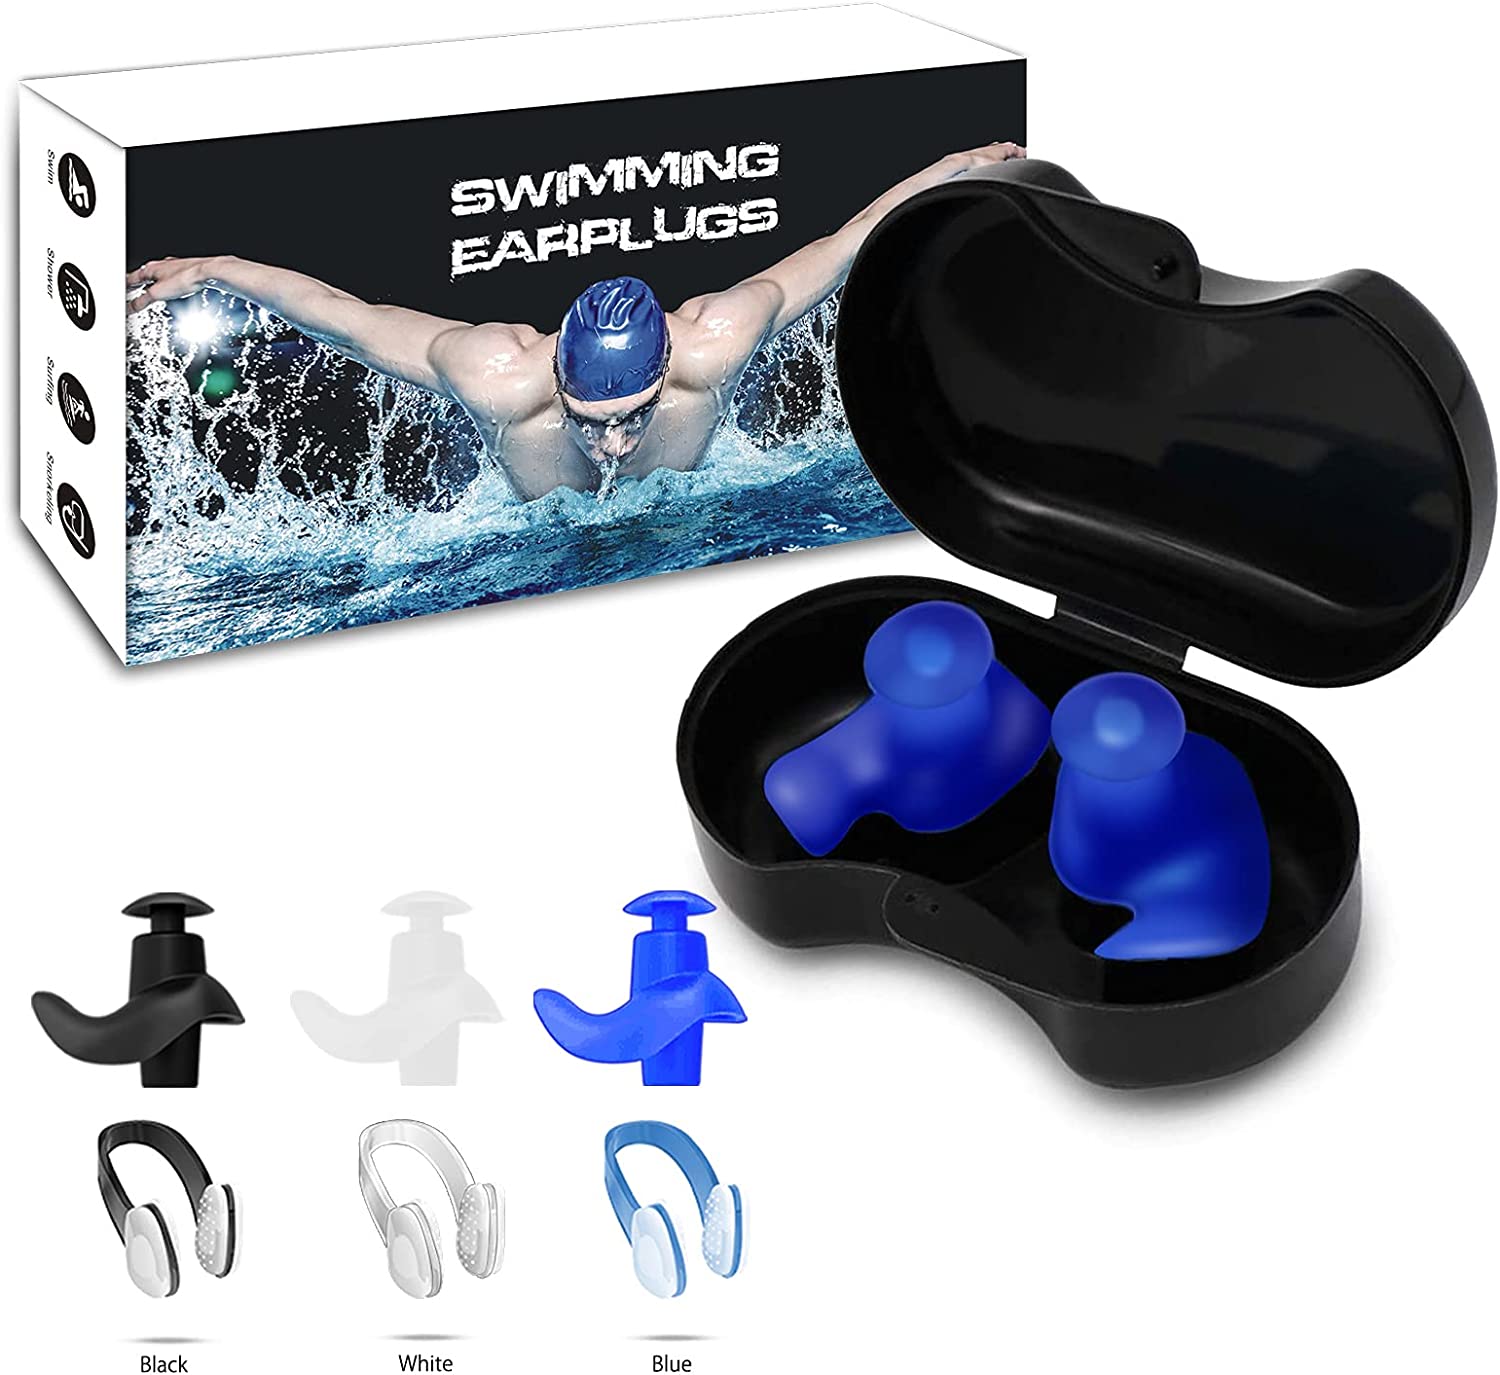 Swimming Ear Plugs Nose Clip Nose Protector, 3 Pairs Professional Waterproof Reusable Silicone Earplugs and Nose Clips for Swimming Surfing Snorkeling Showering Bathing Suitable for Adult and Kids
